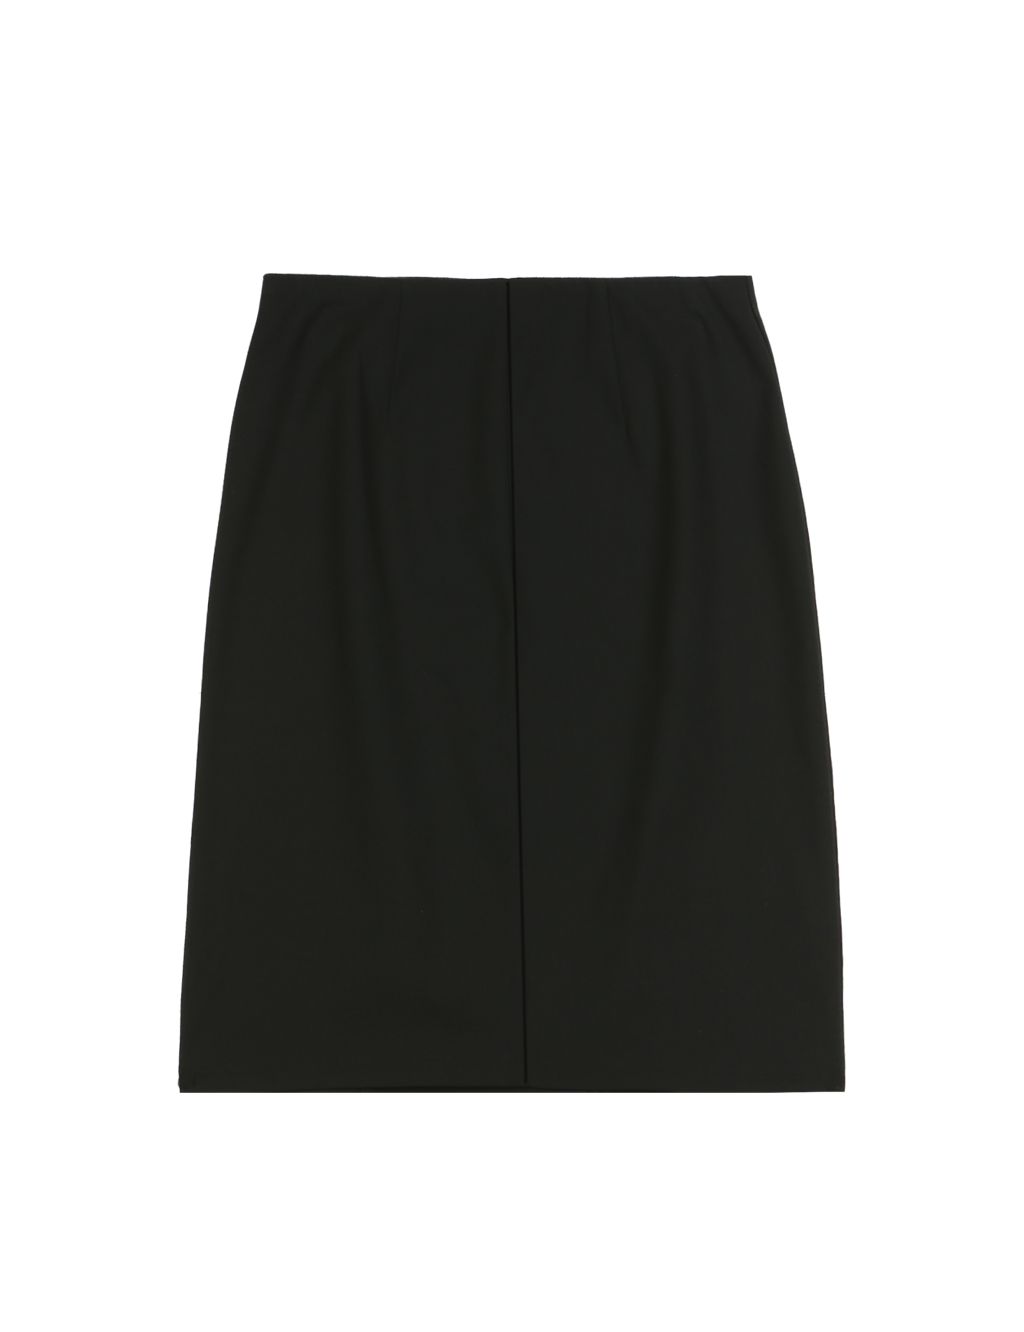 Senior Girls' Skirt with Crease Resistant 1 of 6